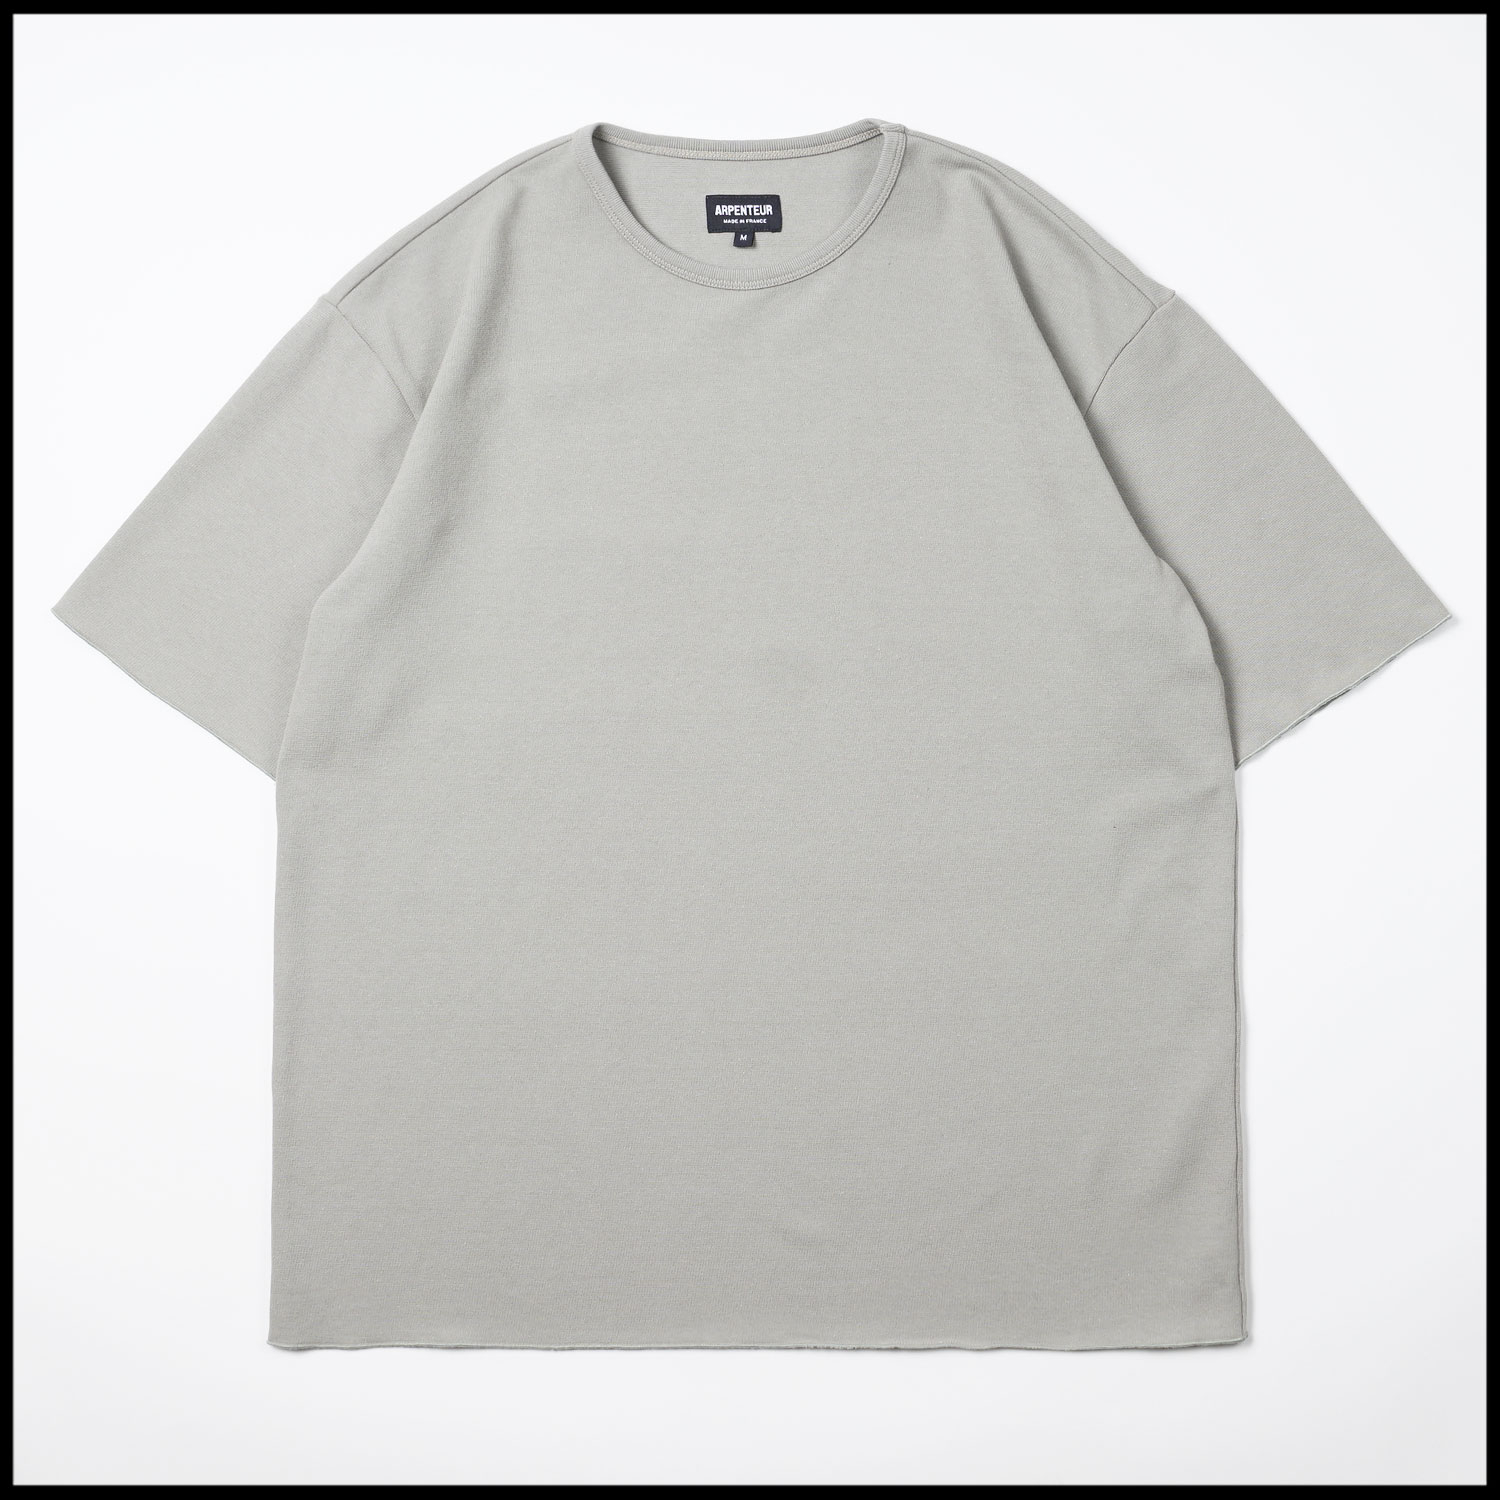 Pontus t-shirt in Stone color by Arpenteur